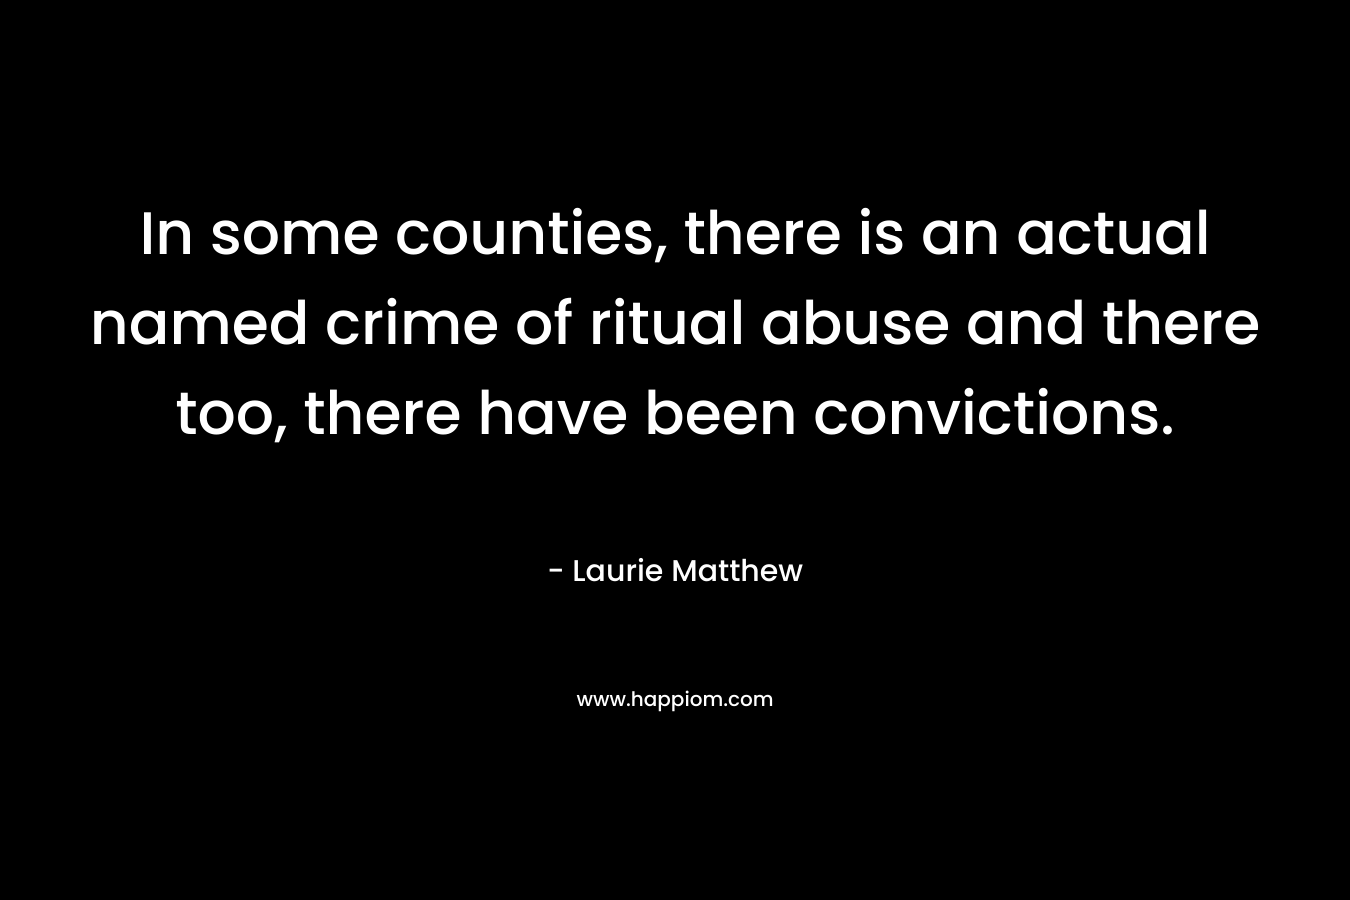 In some counties, there is an actual named crime of ritual abuse and there too, there have been convictions.